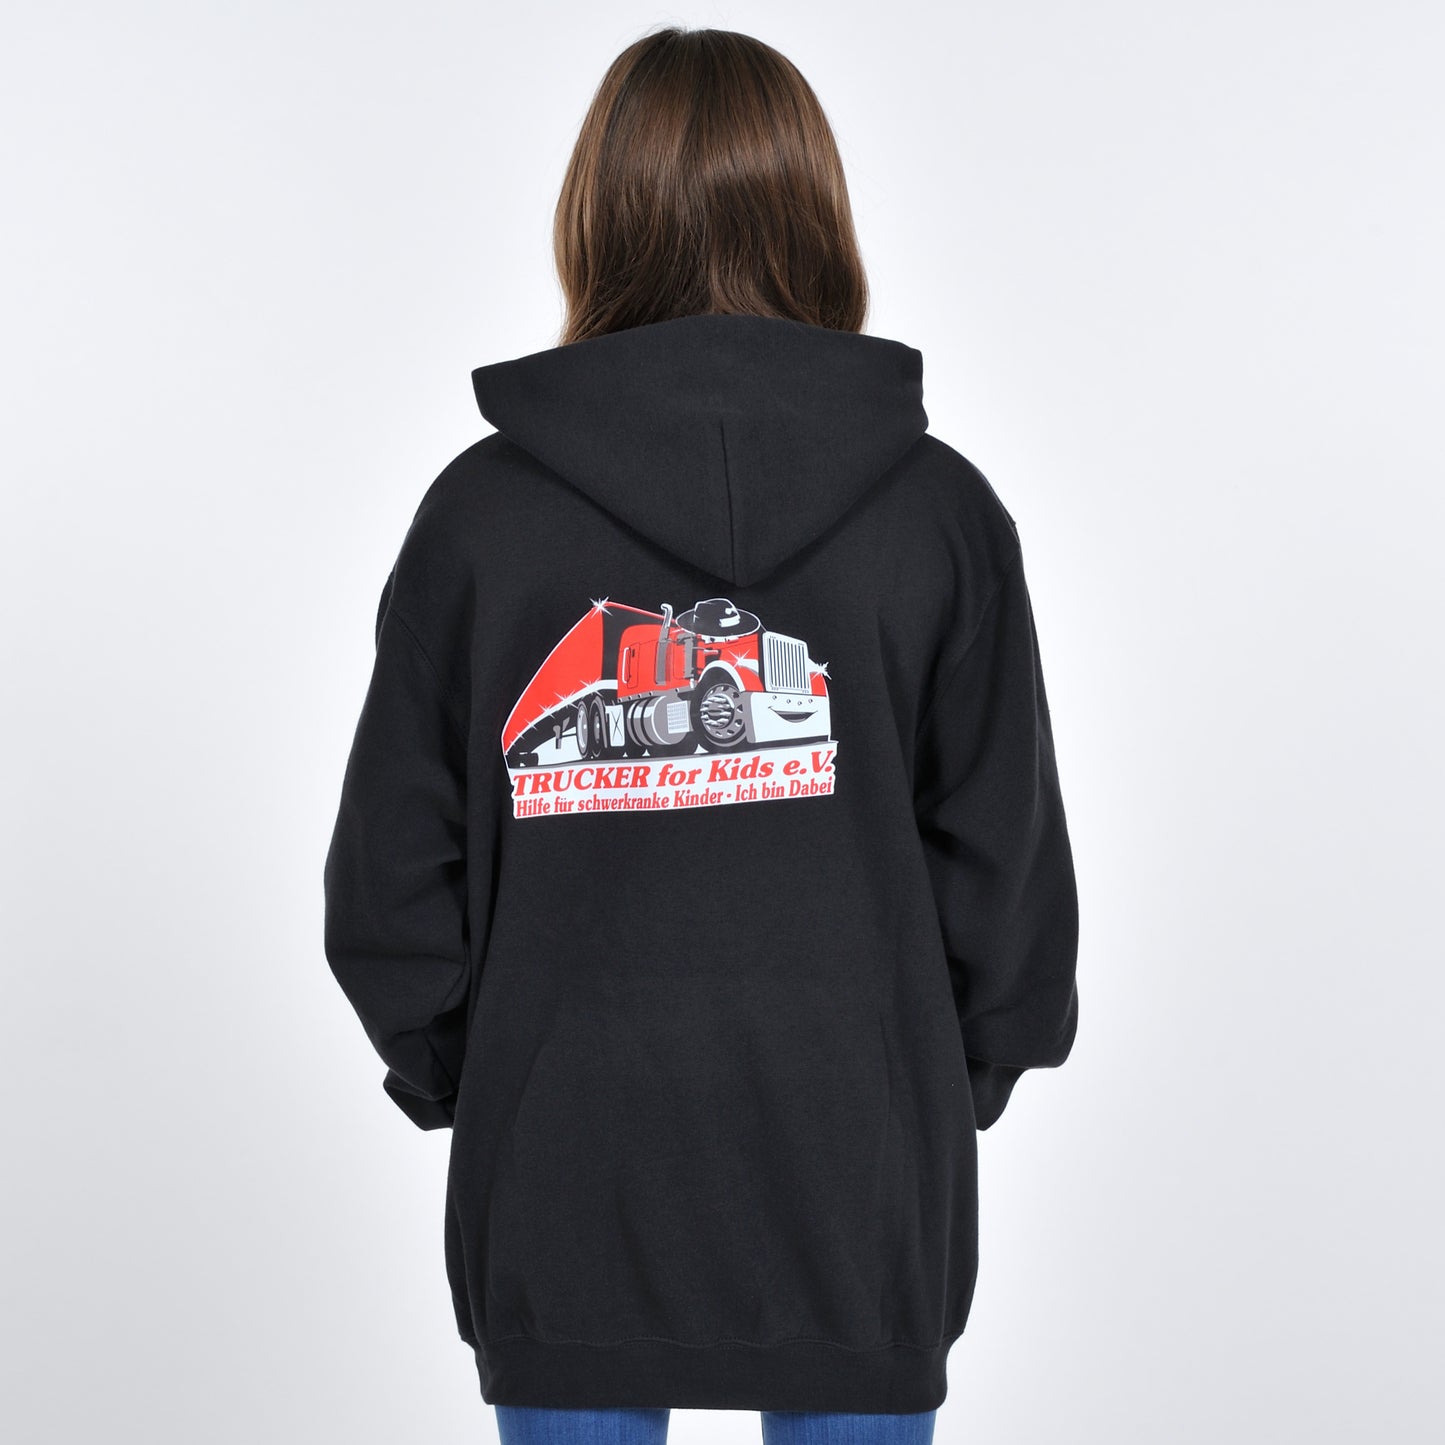 Club hoodie. Old price €38.00 now only €36.50